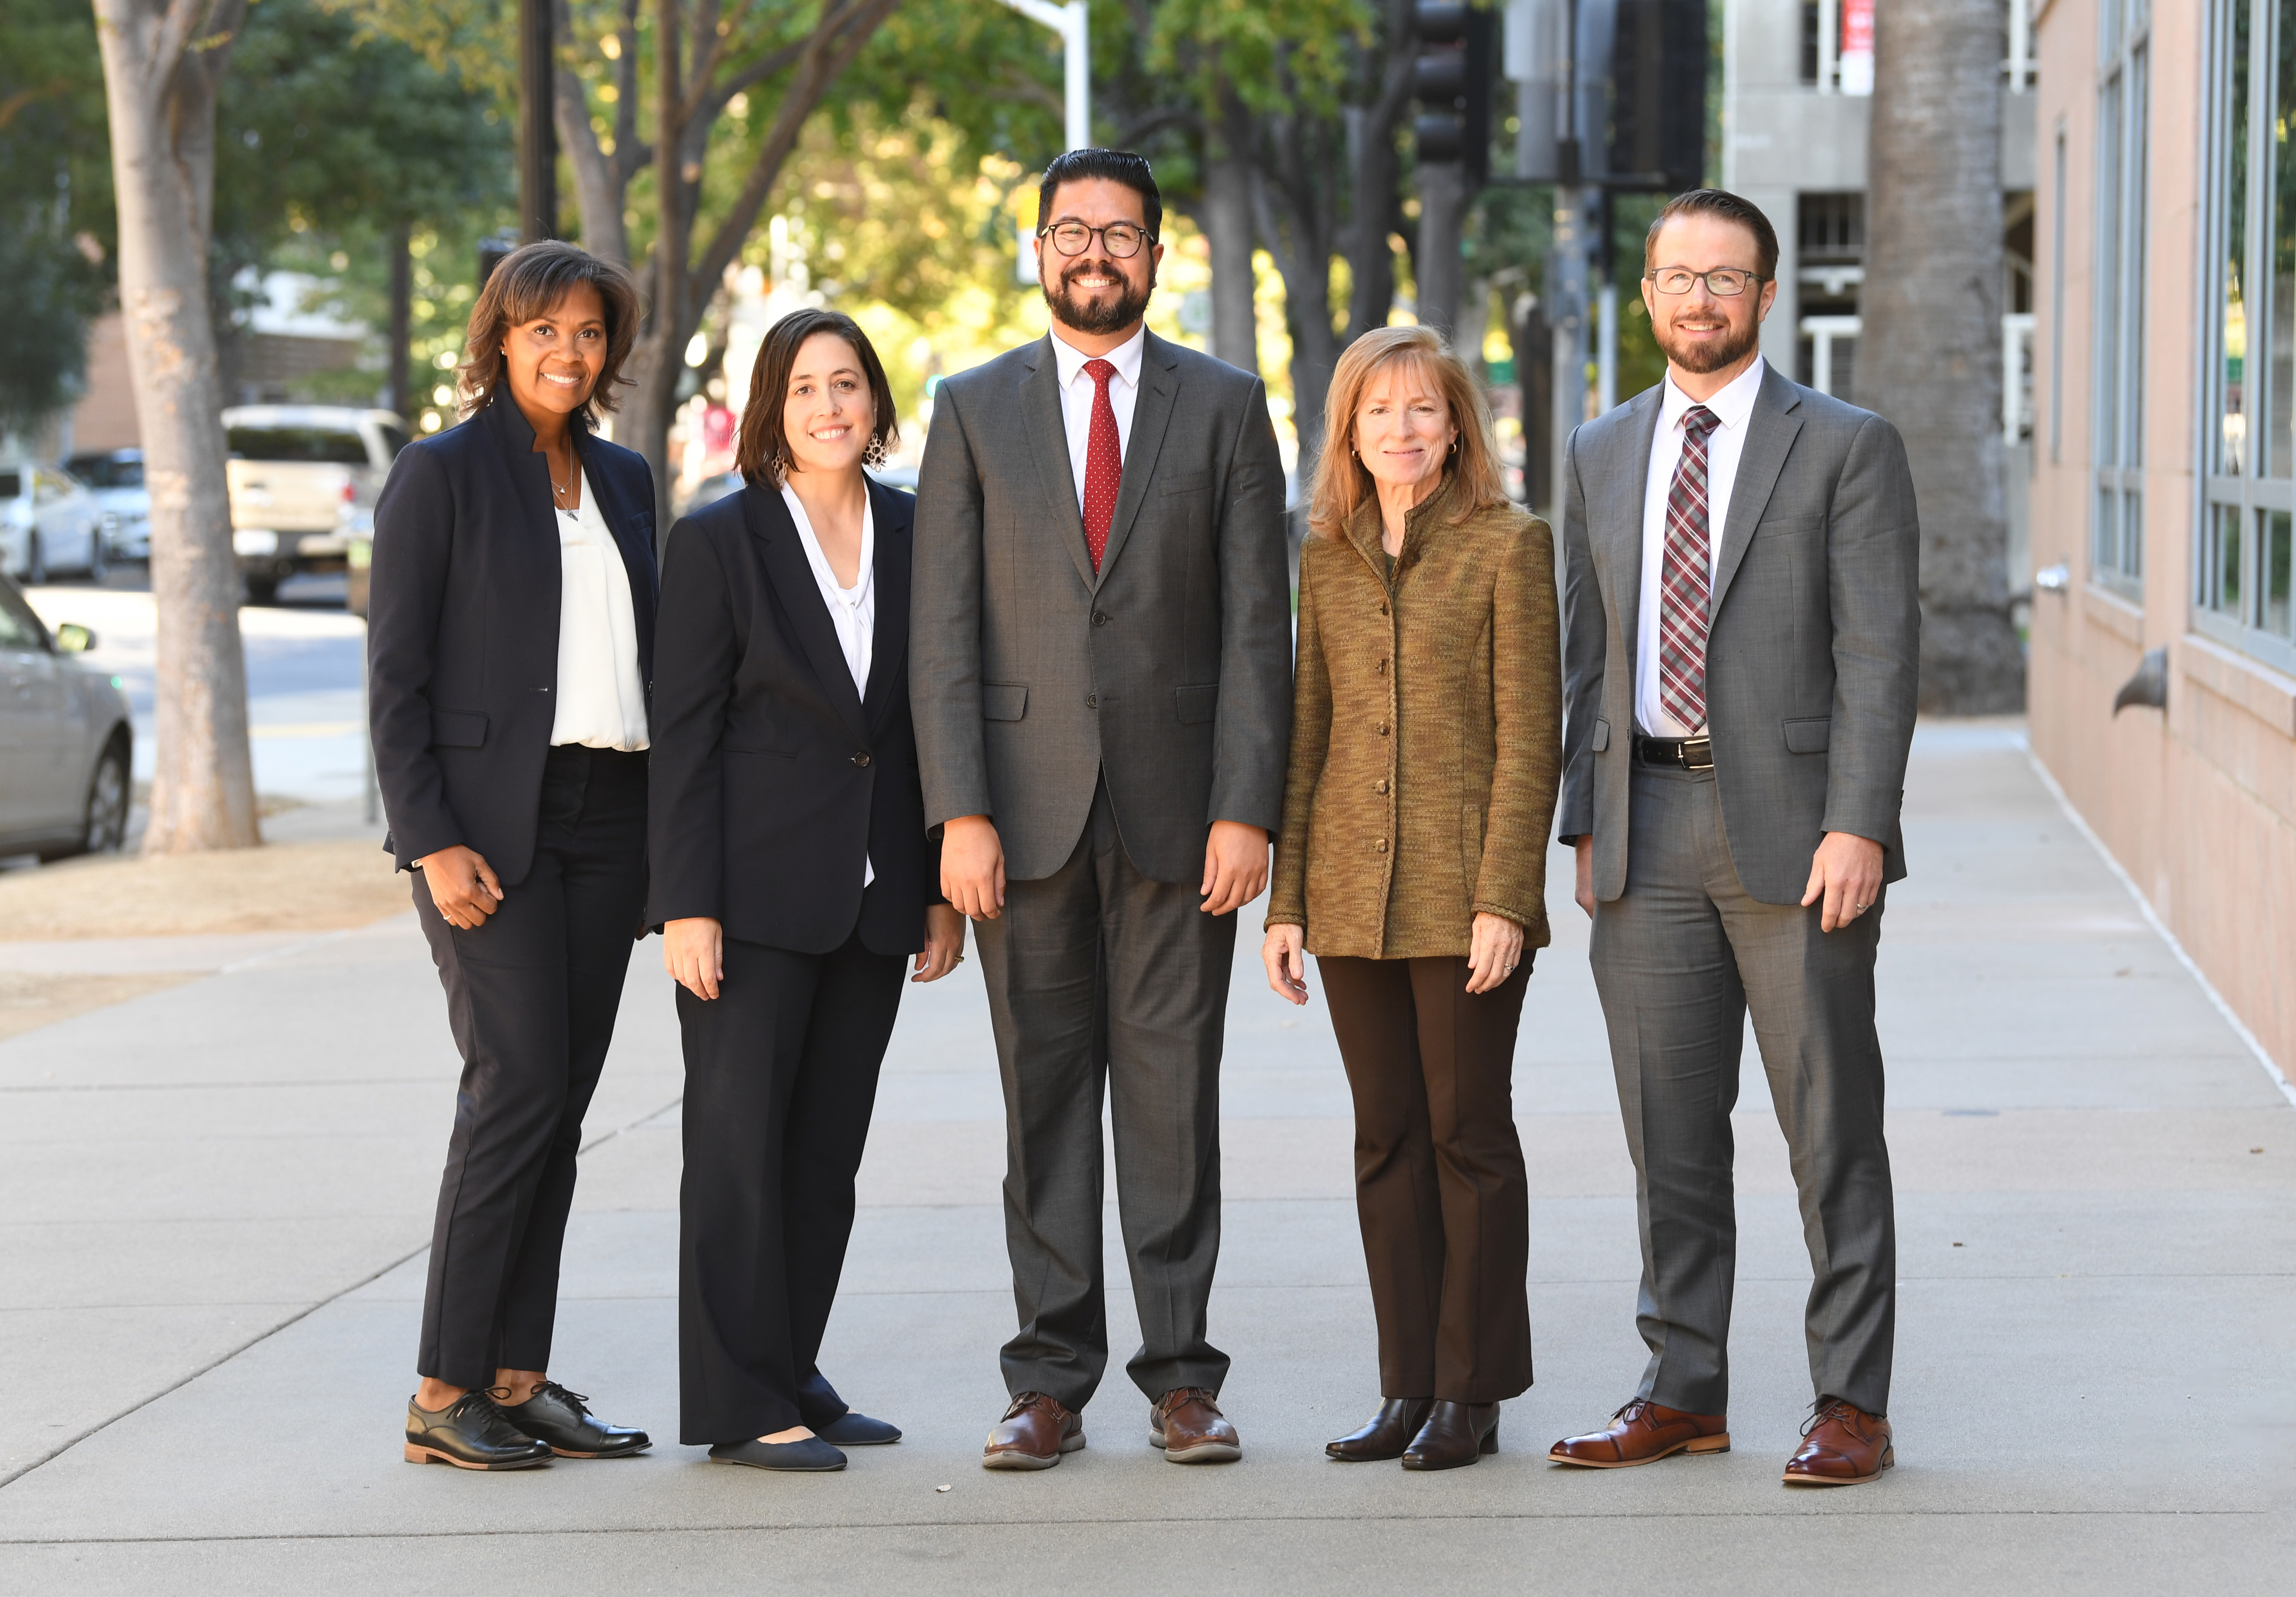 State Water Resources Board Members: From left to right, Nichole Morgan, Laurel Firestone, Board Chair E. Joaquin Esquivel, Vice Chair Dorene D’Adamo, and Sean Maguire